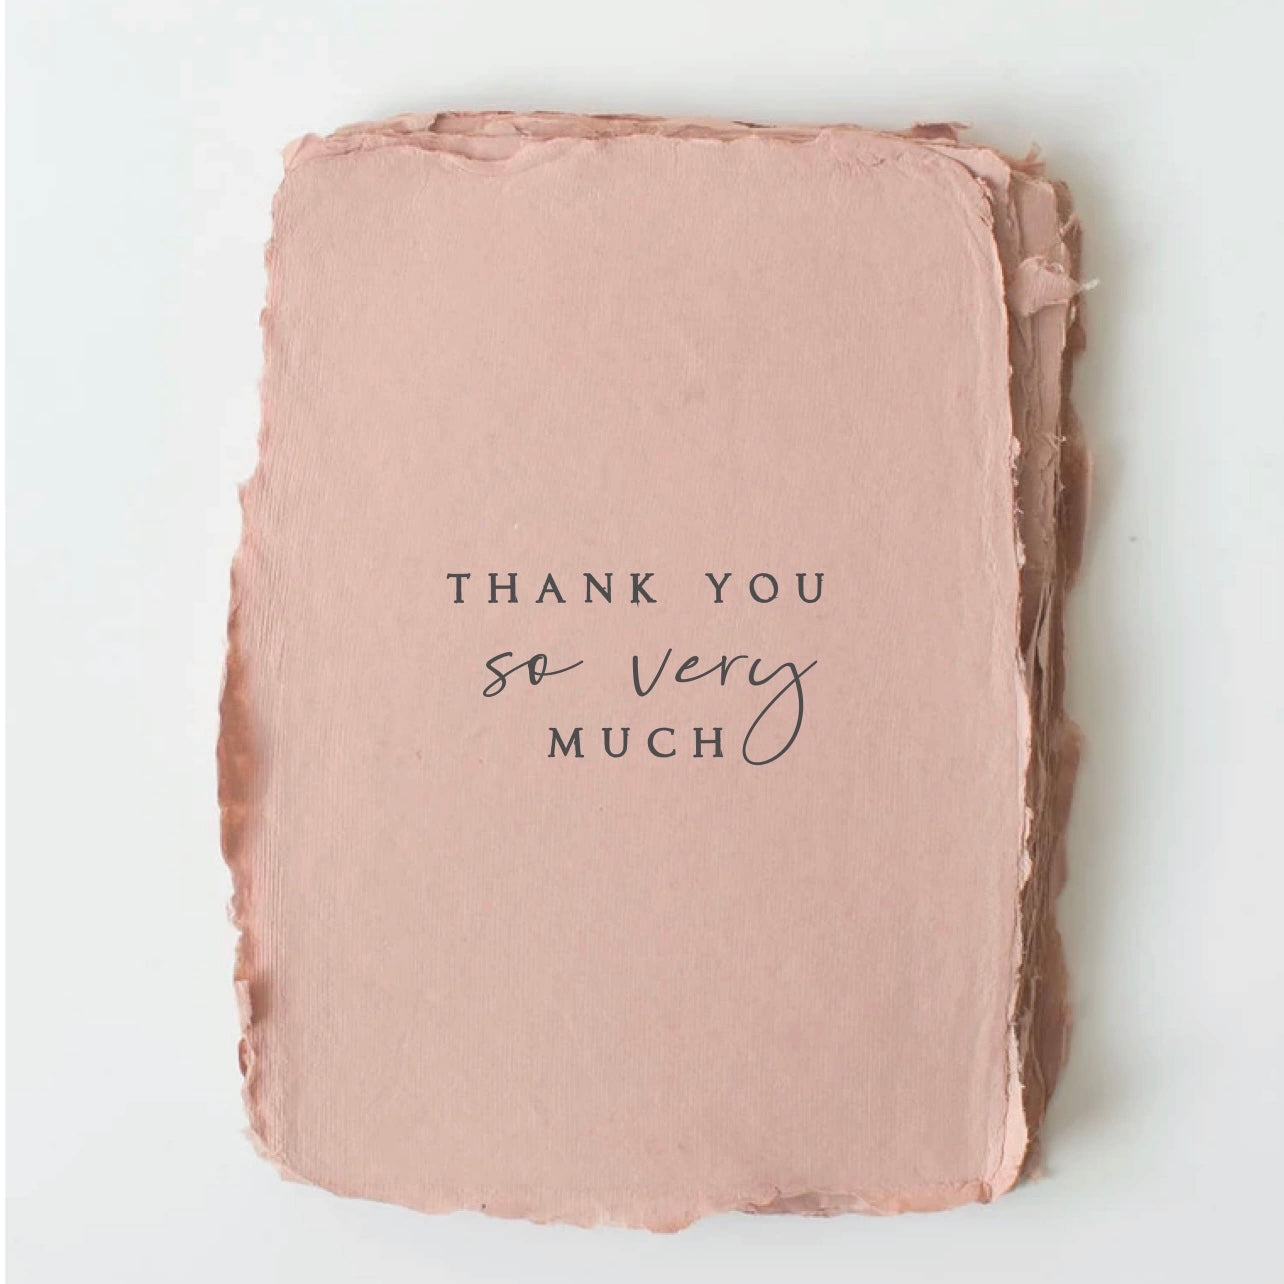 Greeting Card - Thank you so very much